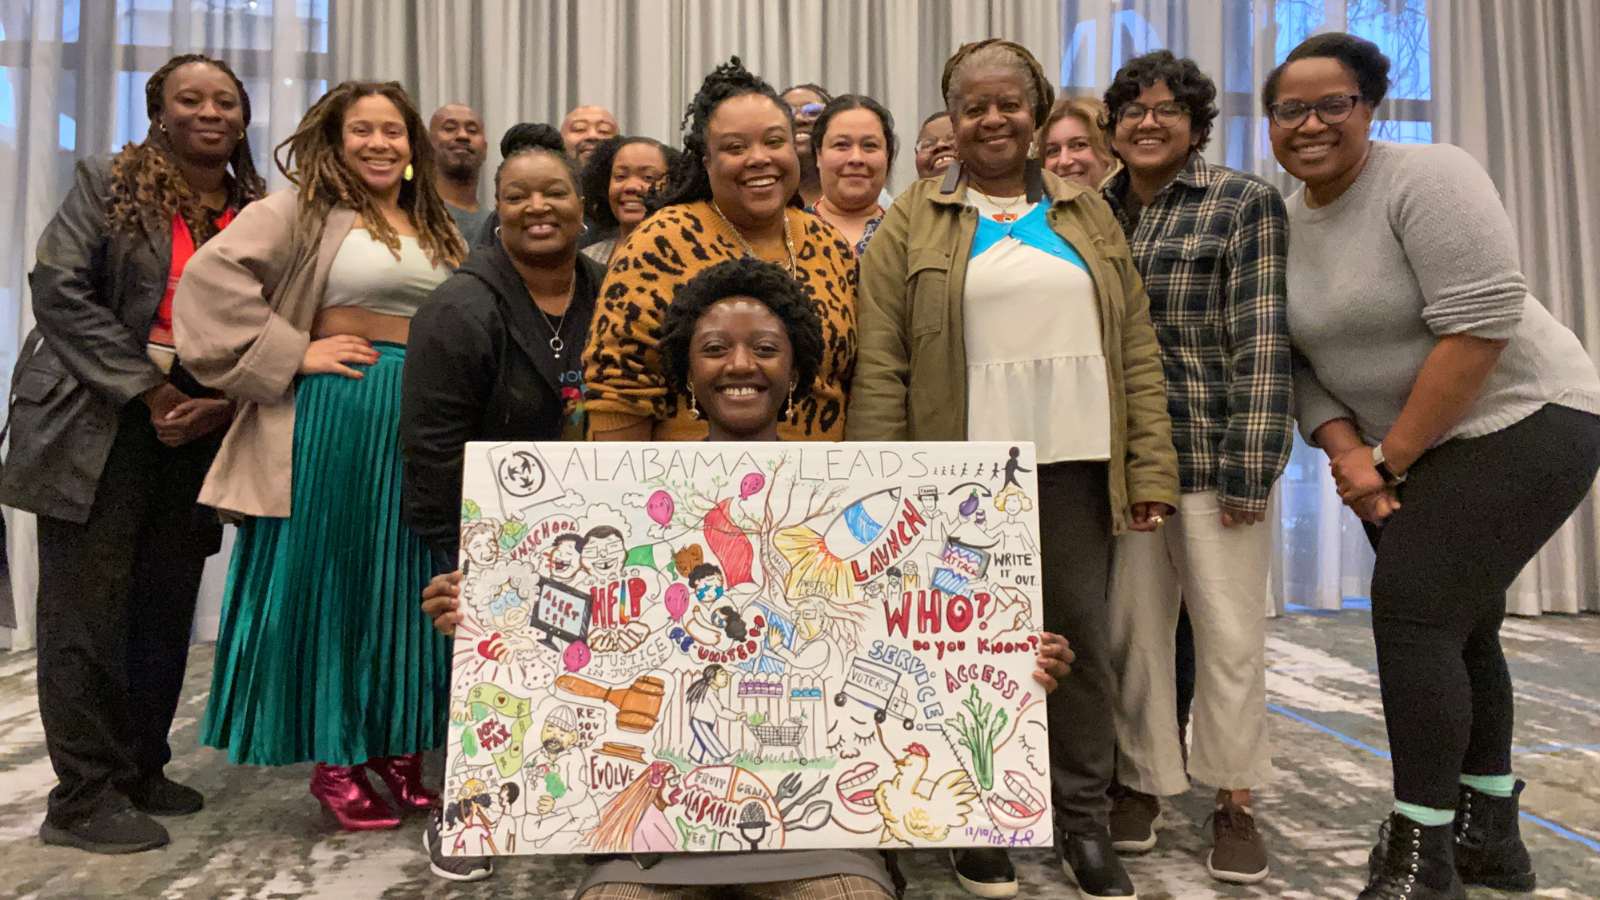 Photo caption: Alabama Leads grassroots leaders share their vision with graphic notetaker in Mobile, AL in December 2022. Credit: Tiiwon Siaway @atri.color